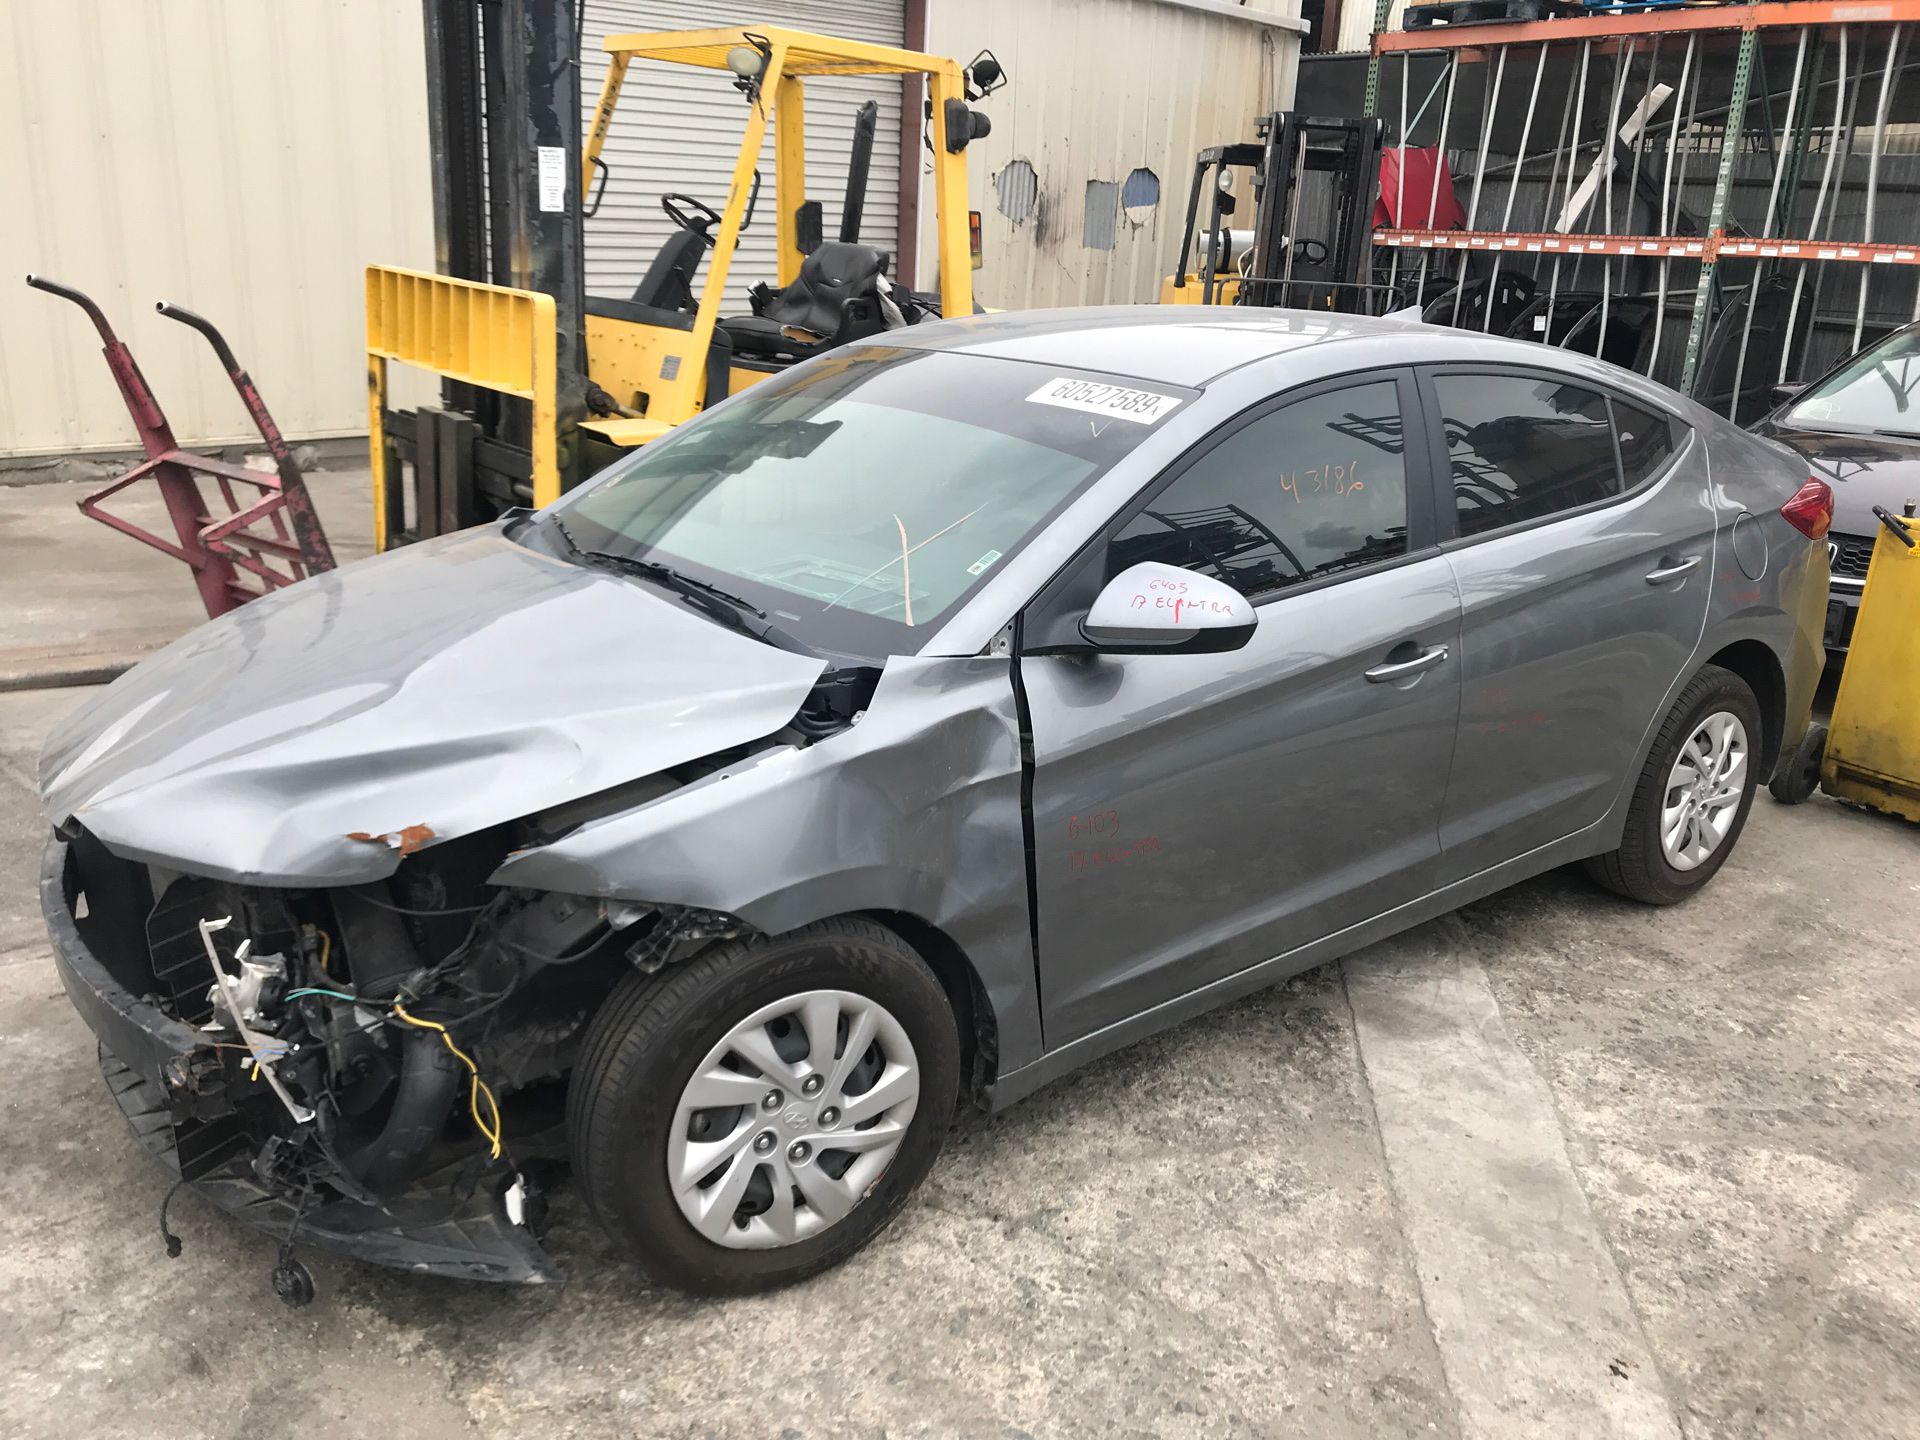 2017 Hyundai Elantra parting out. Parts. 6403. Ask for particular item.